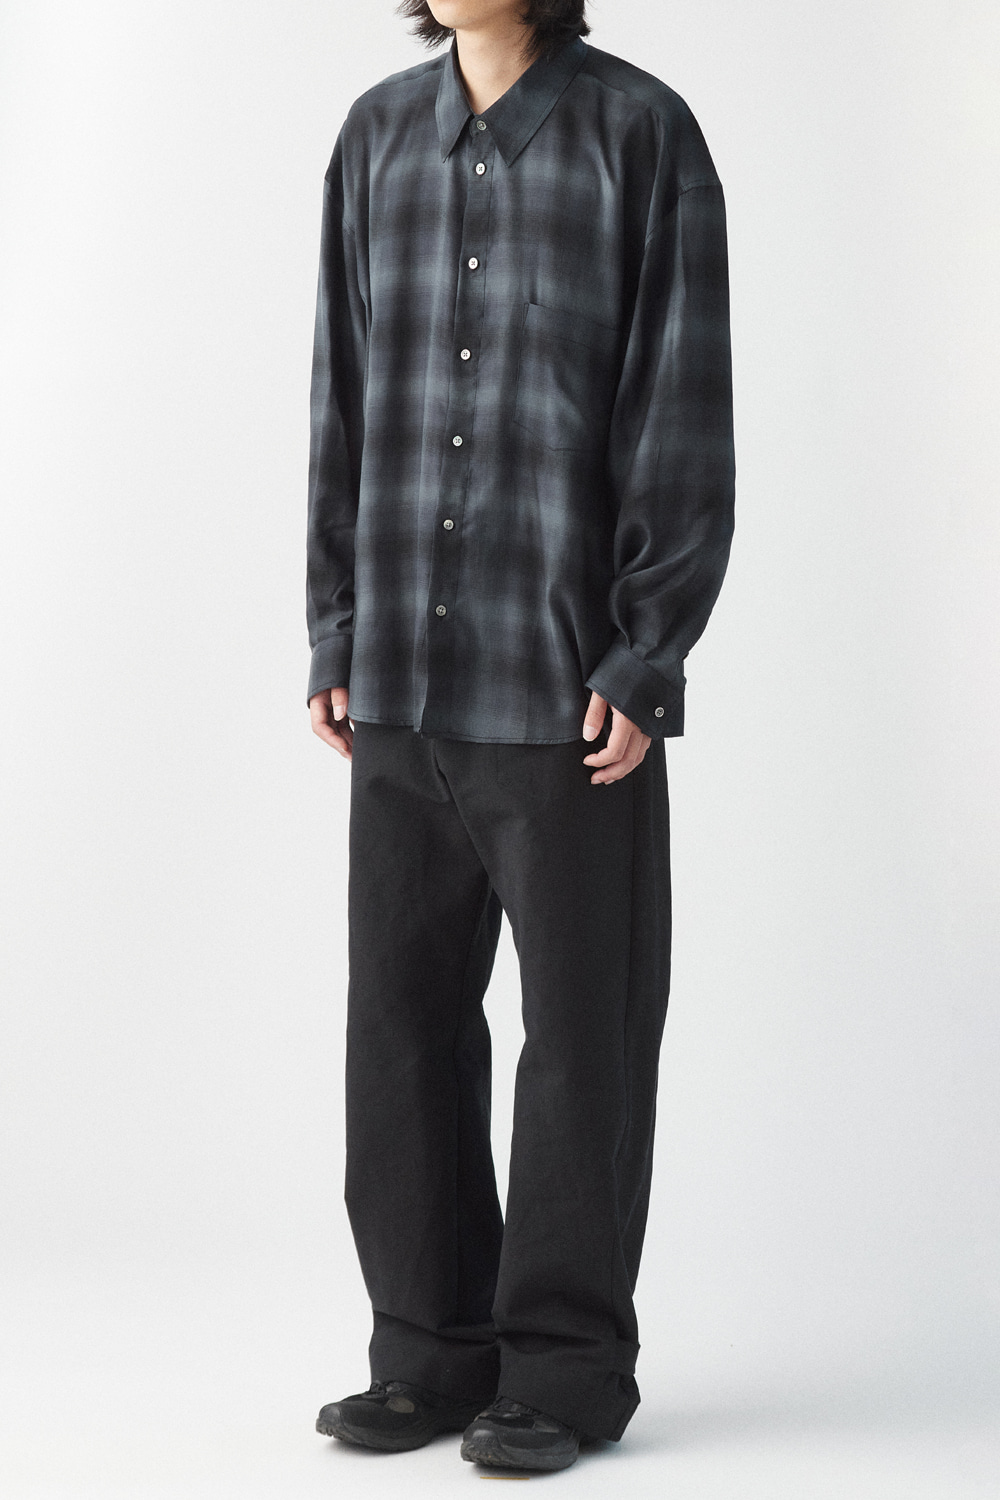 [soui. Exclusive] Classic Shirt Ombre Green Charcoal